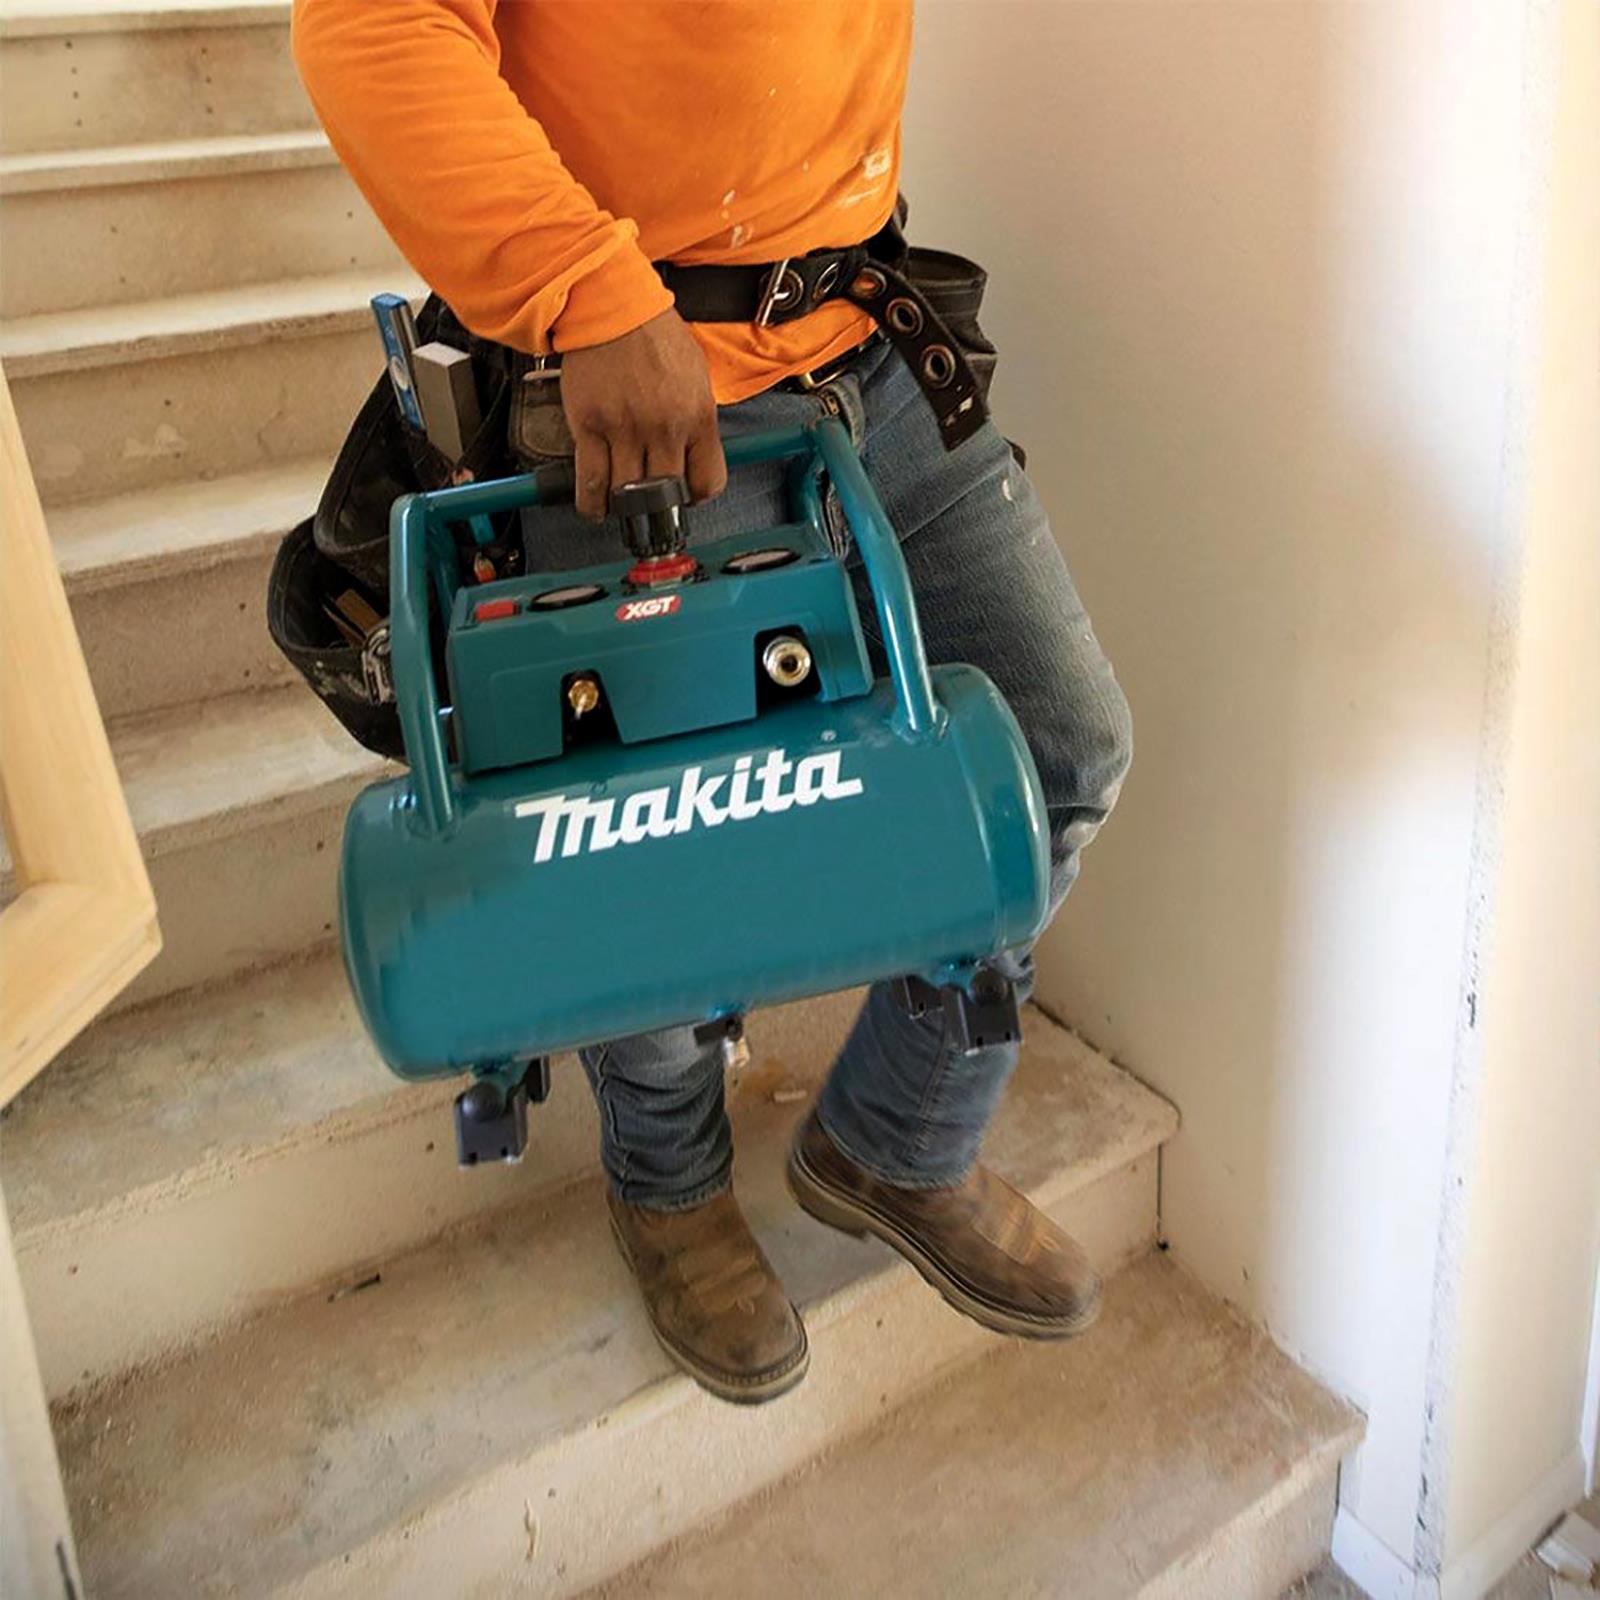 Makita Air Compressor XGT 40V Max Brushless Cordless Portable AC001GZ Body Only